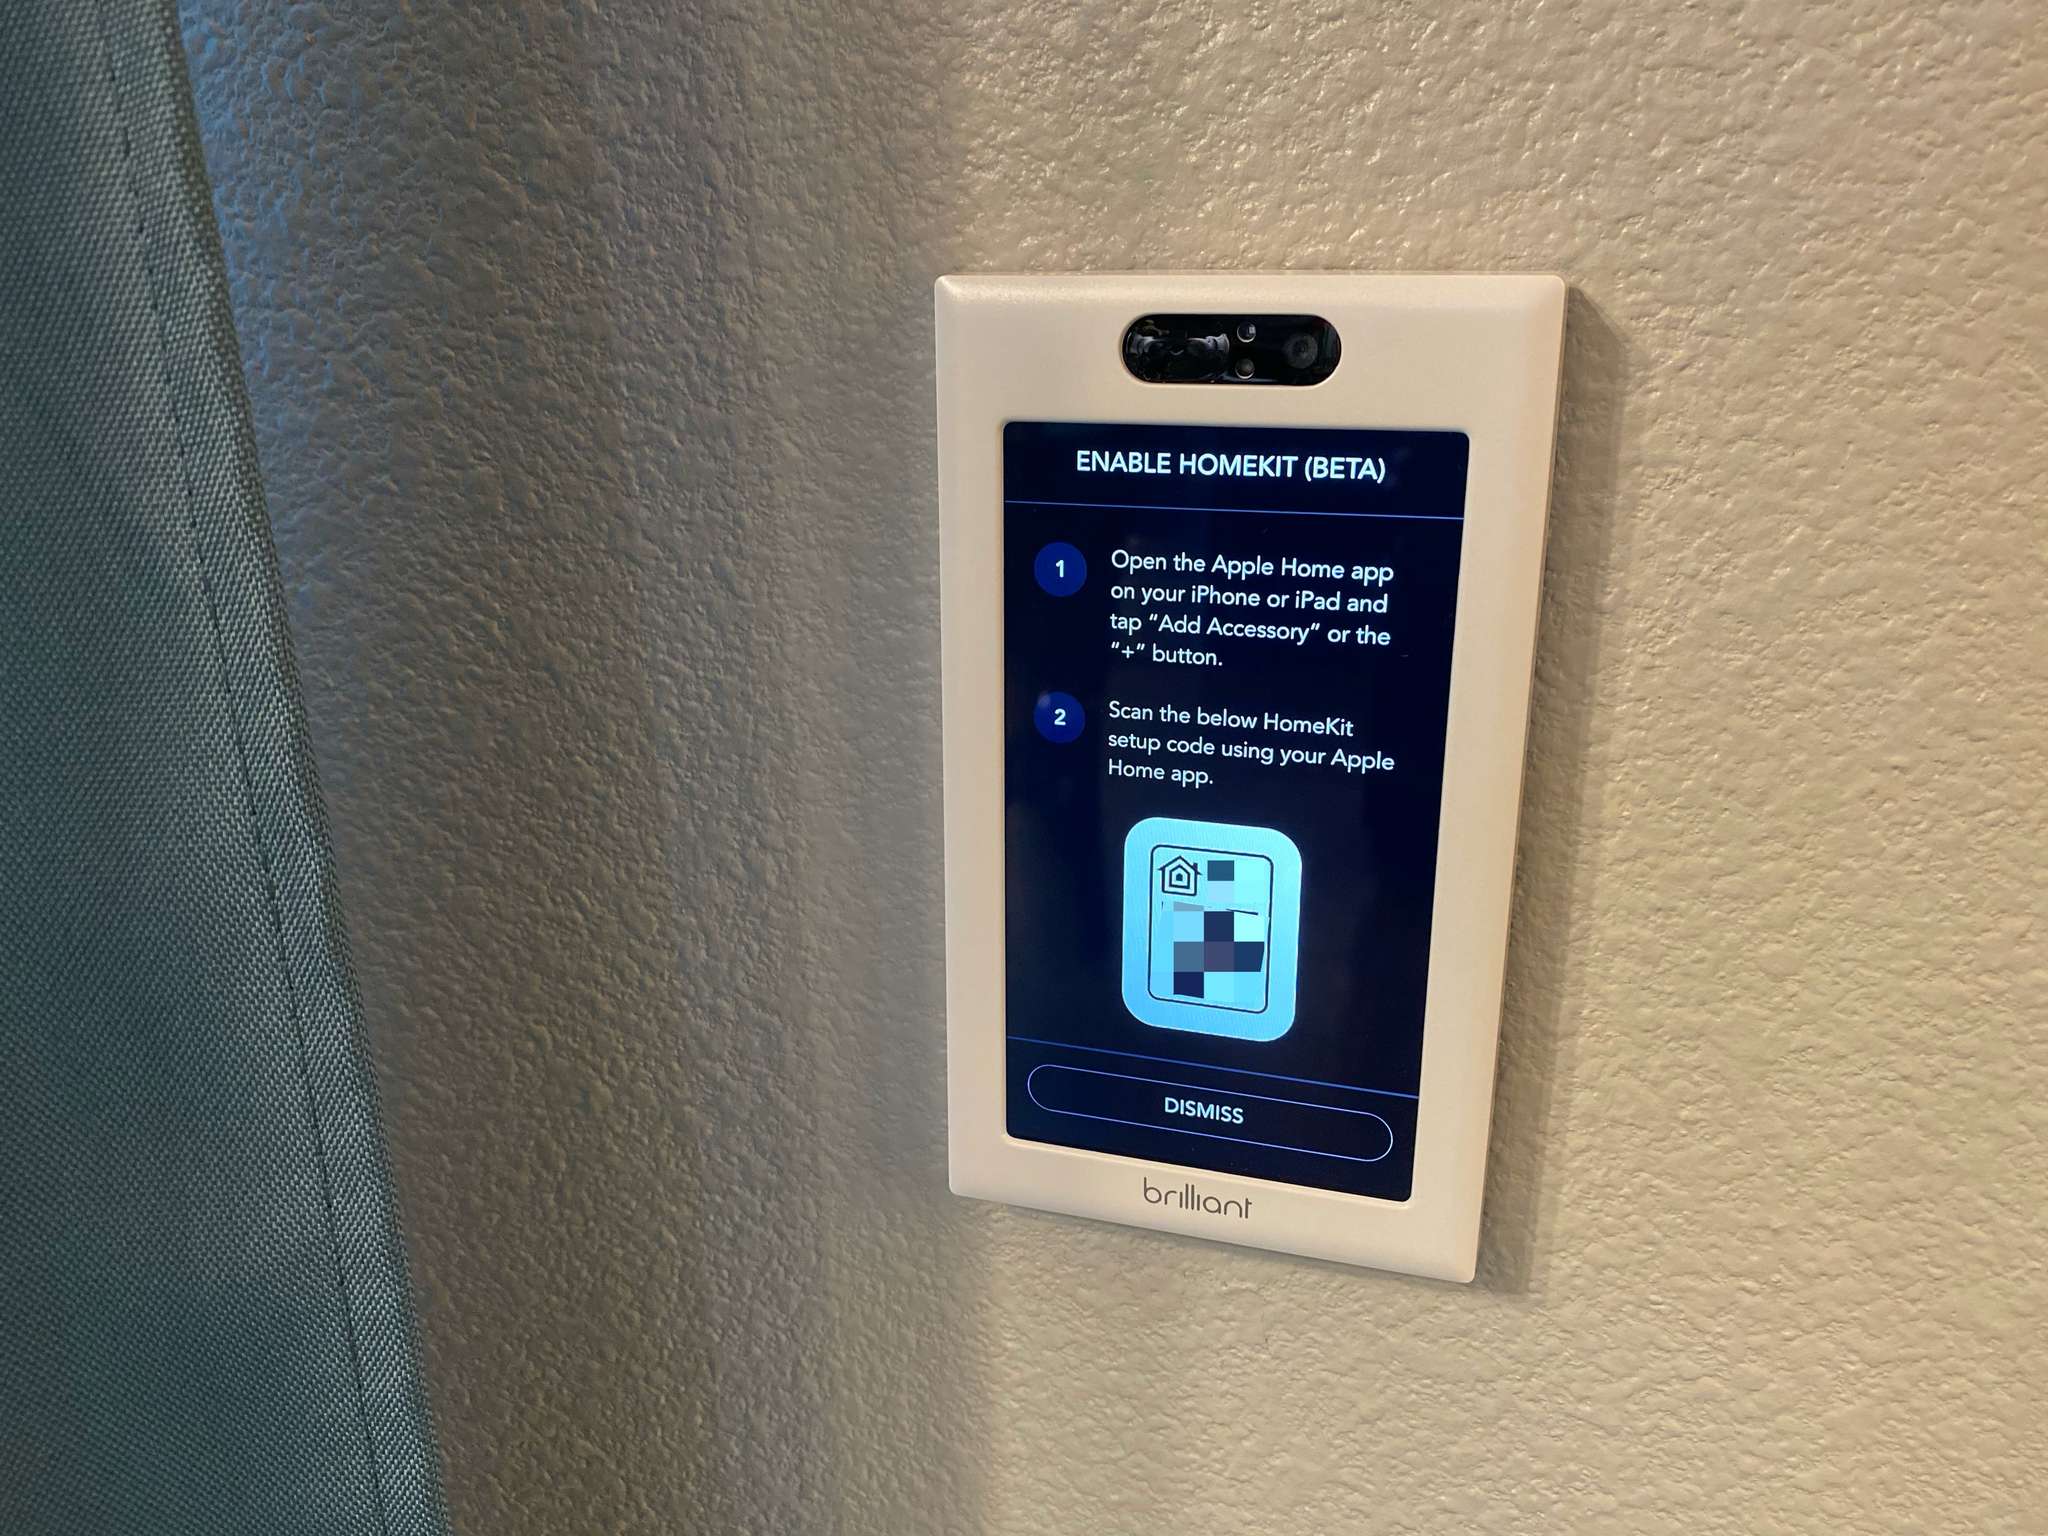 Brilliant Home Control installed on a wall with the HomeKit setup code on its display